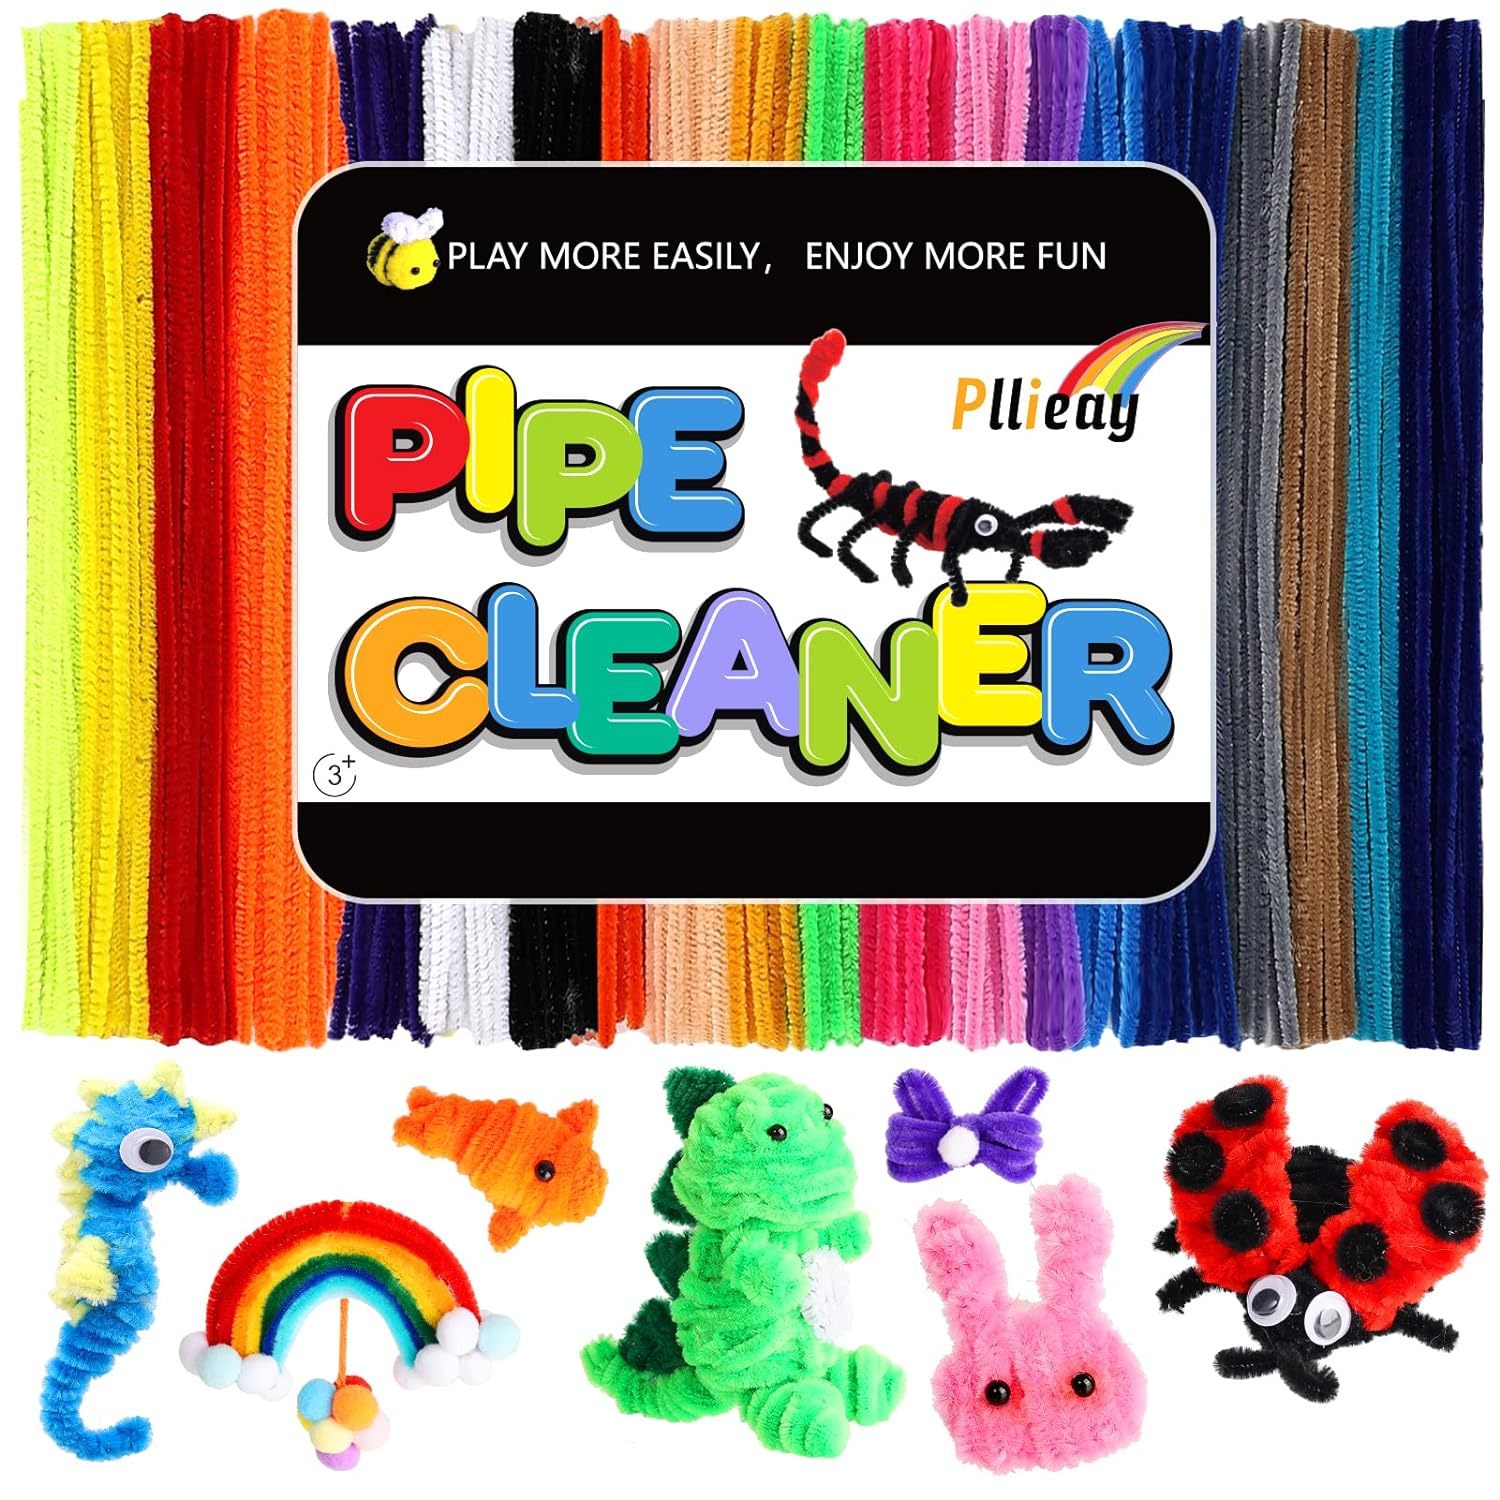 Pipe Cleaners Glitter Pipe Cleaners Craft 100pcs12 Kids Arts And